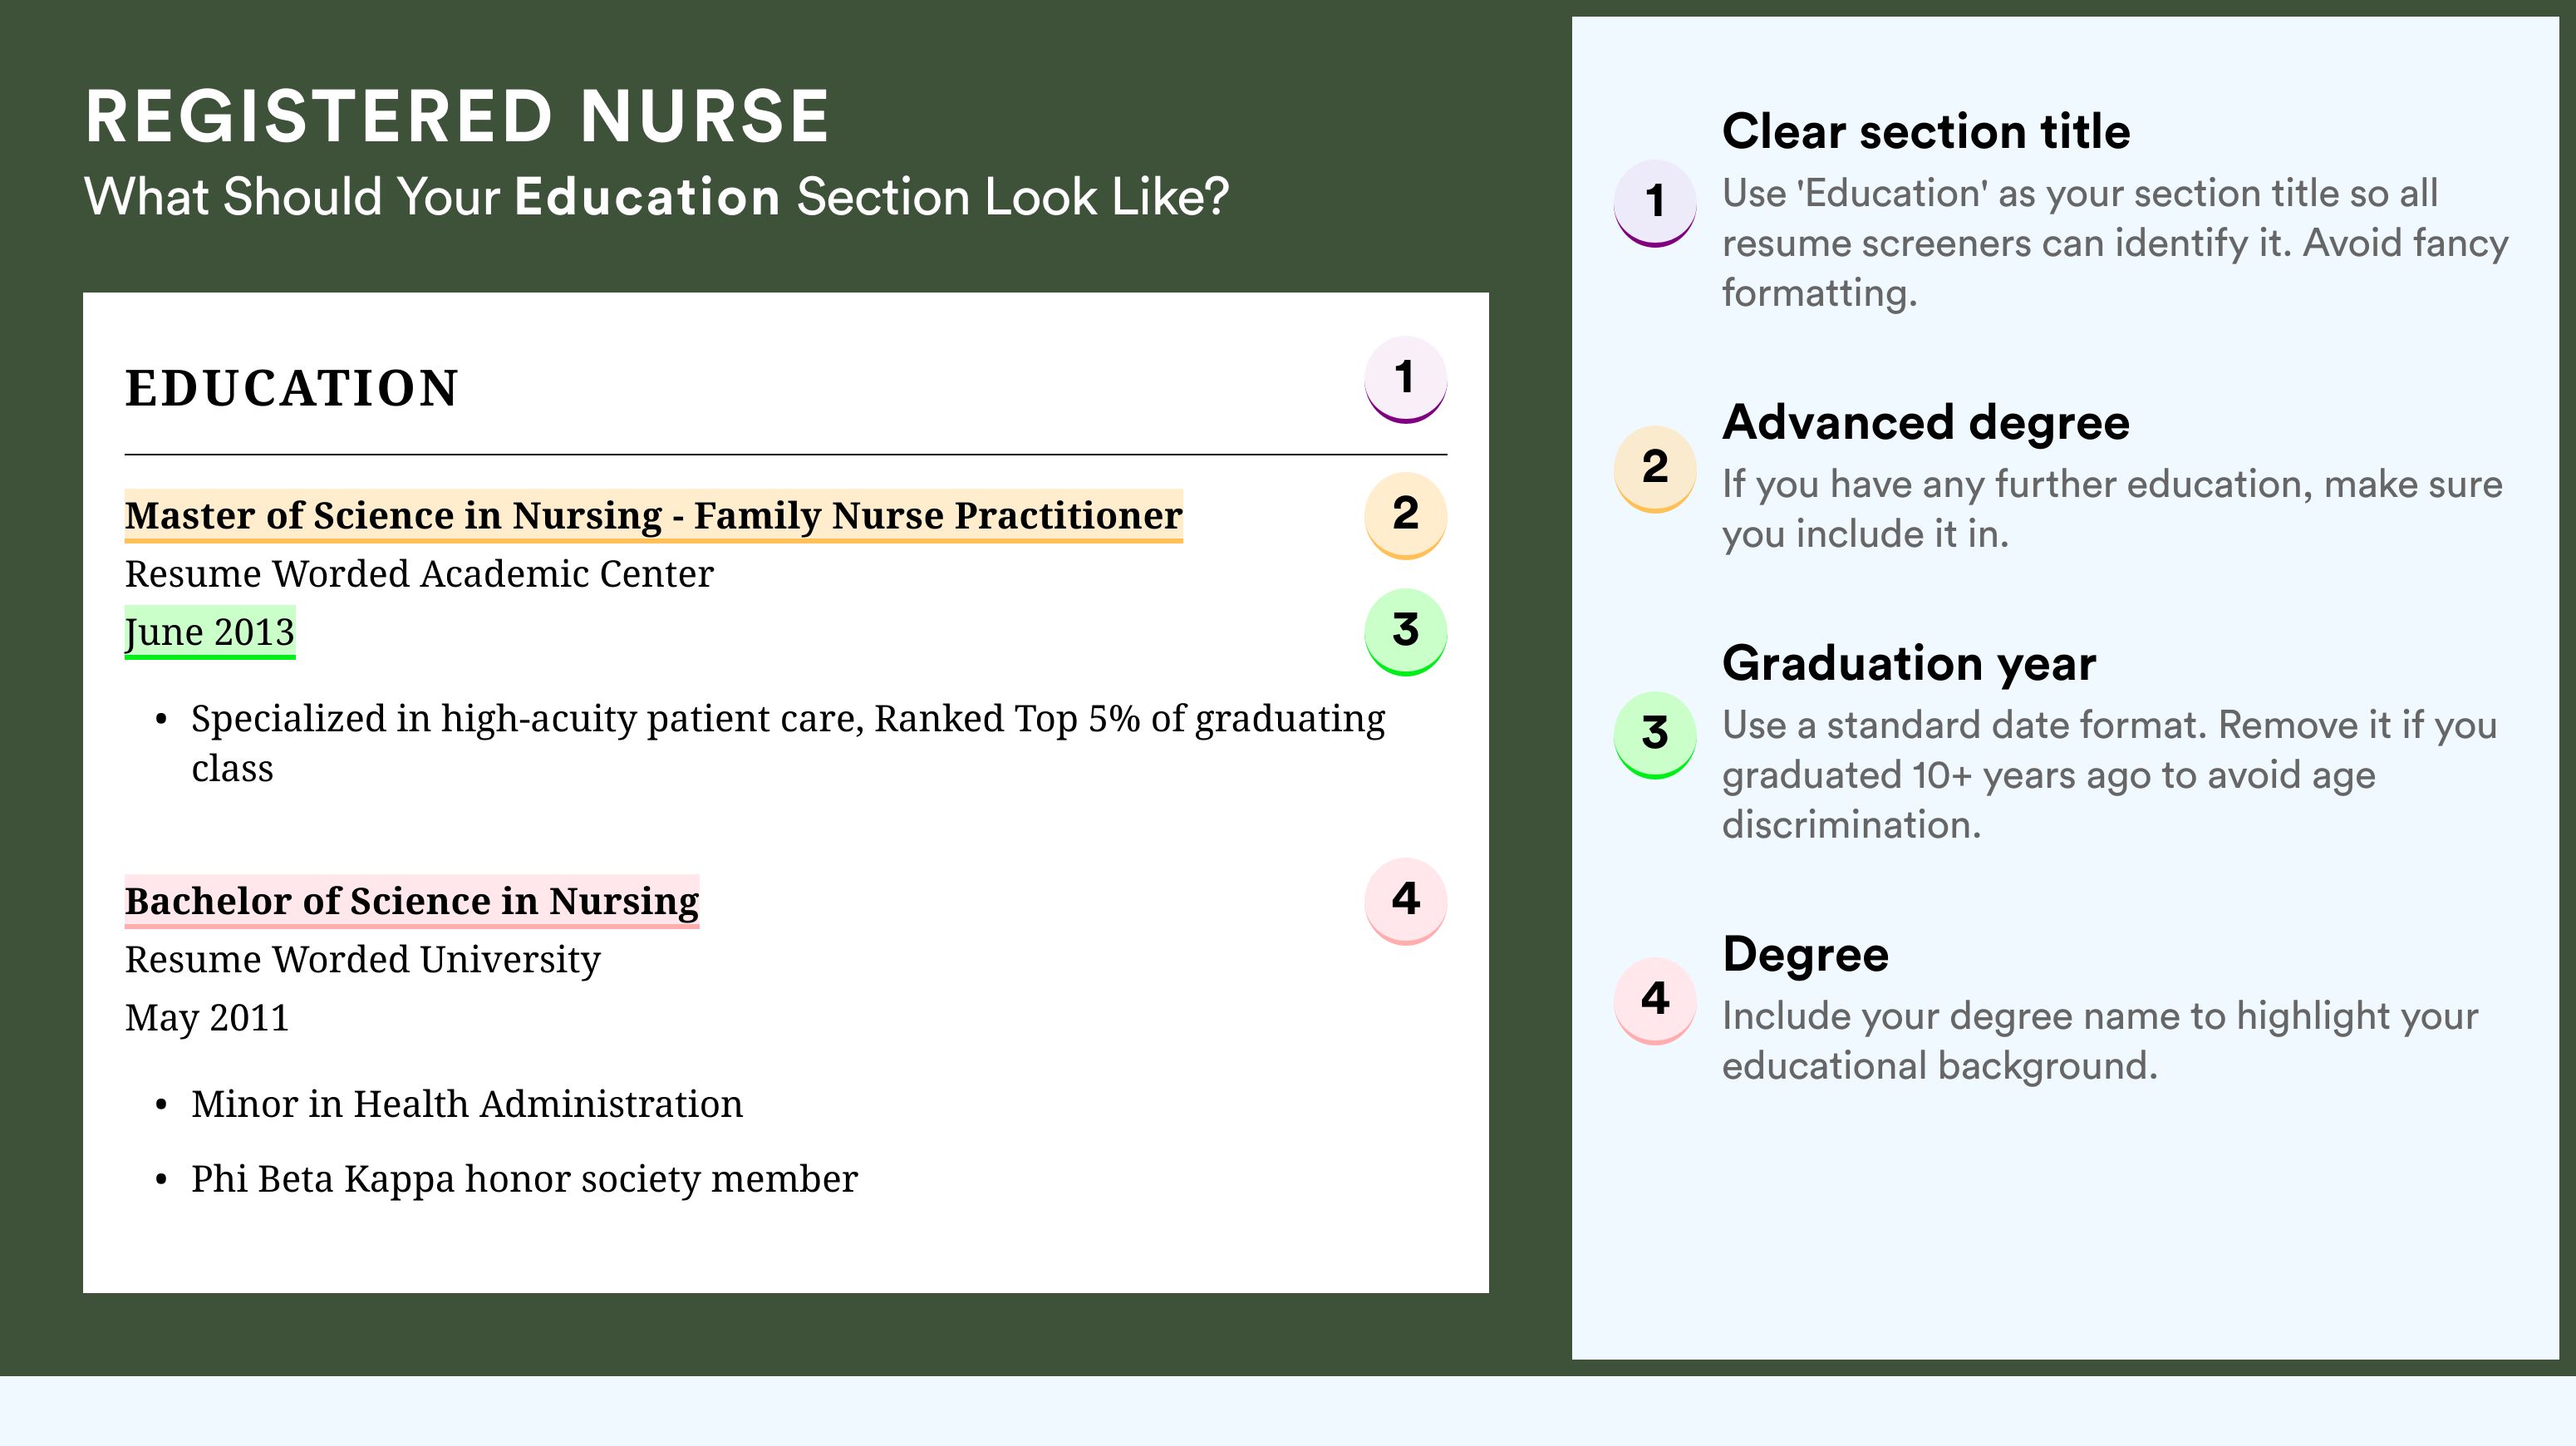 How To Write An Education Section - Registered Nurse Roles